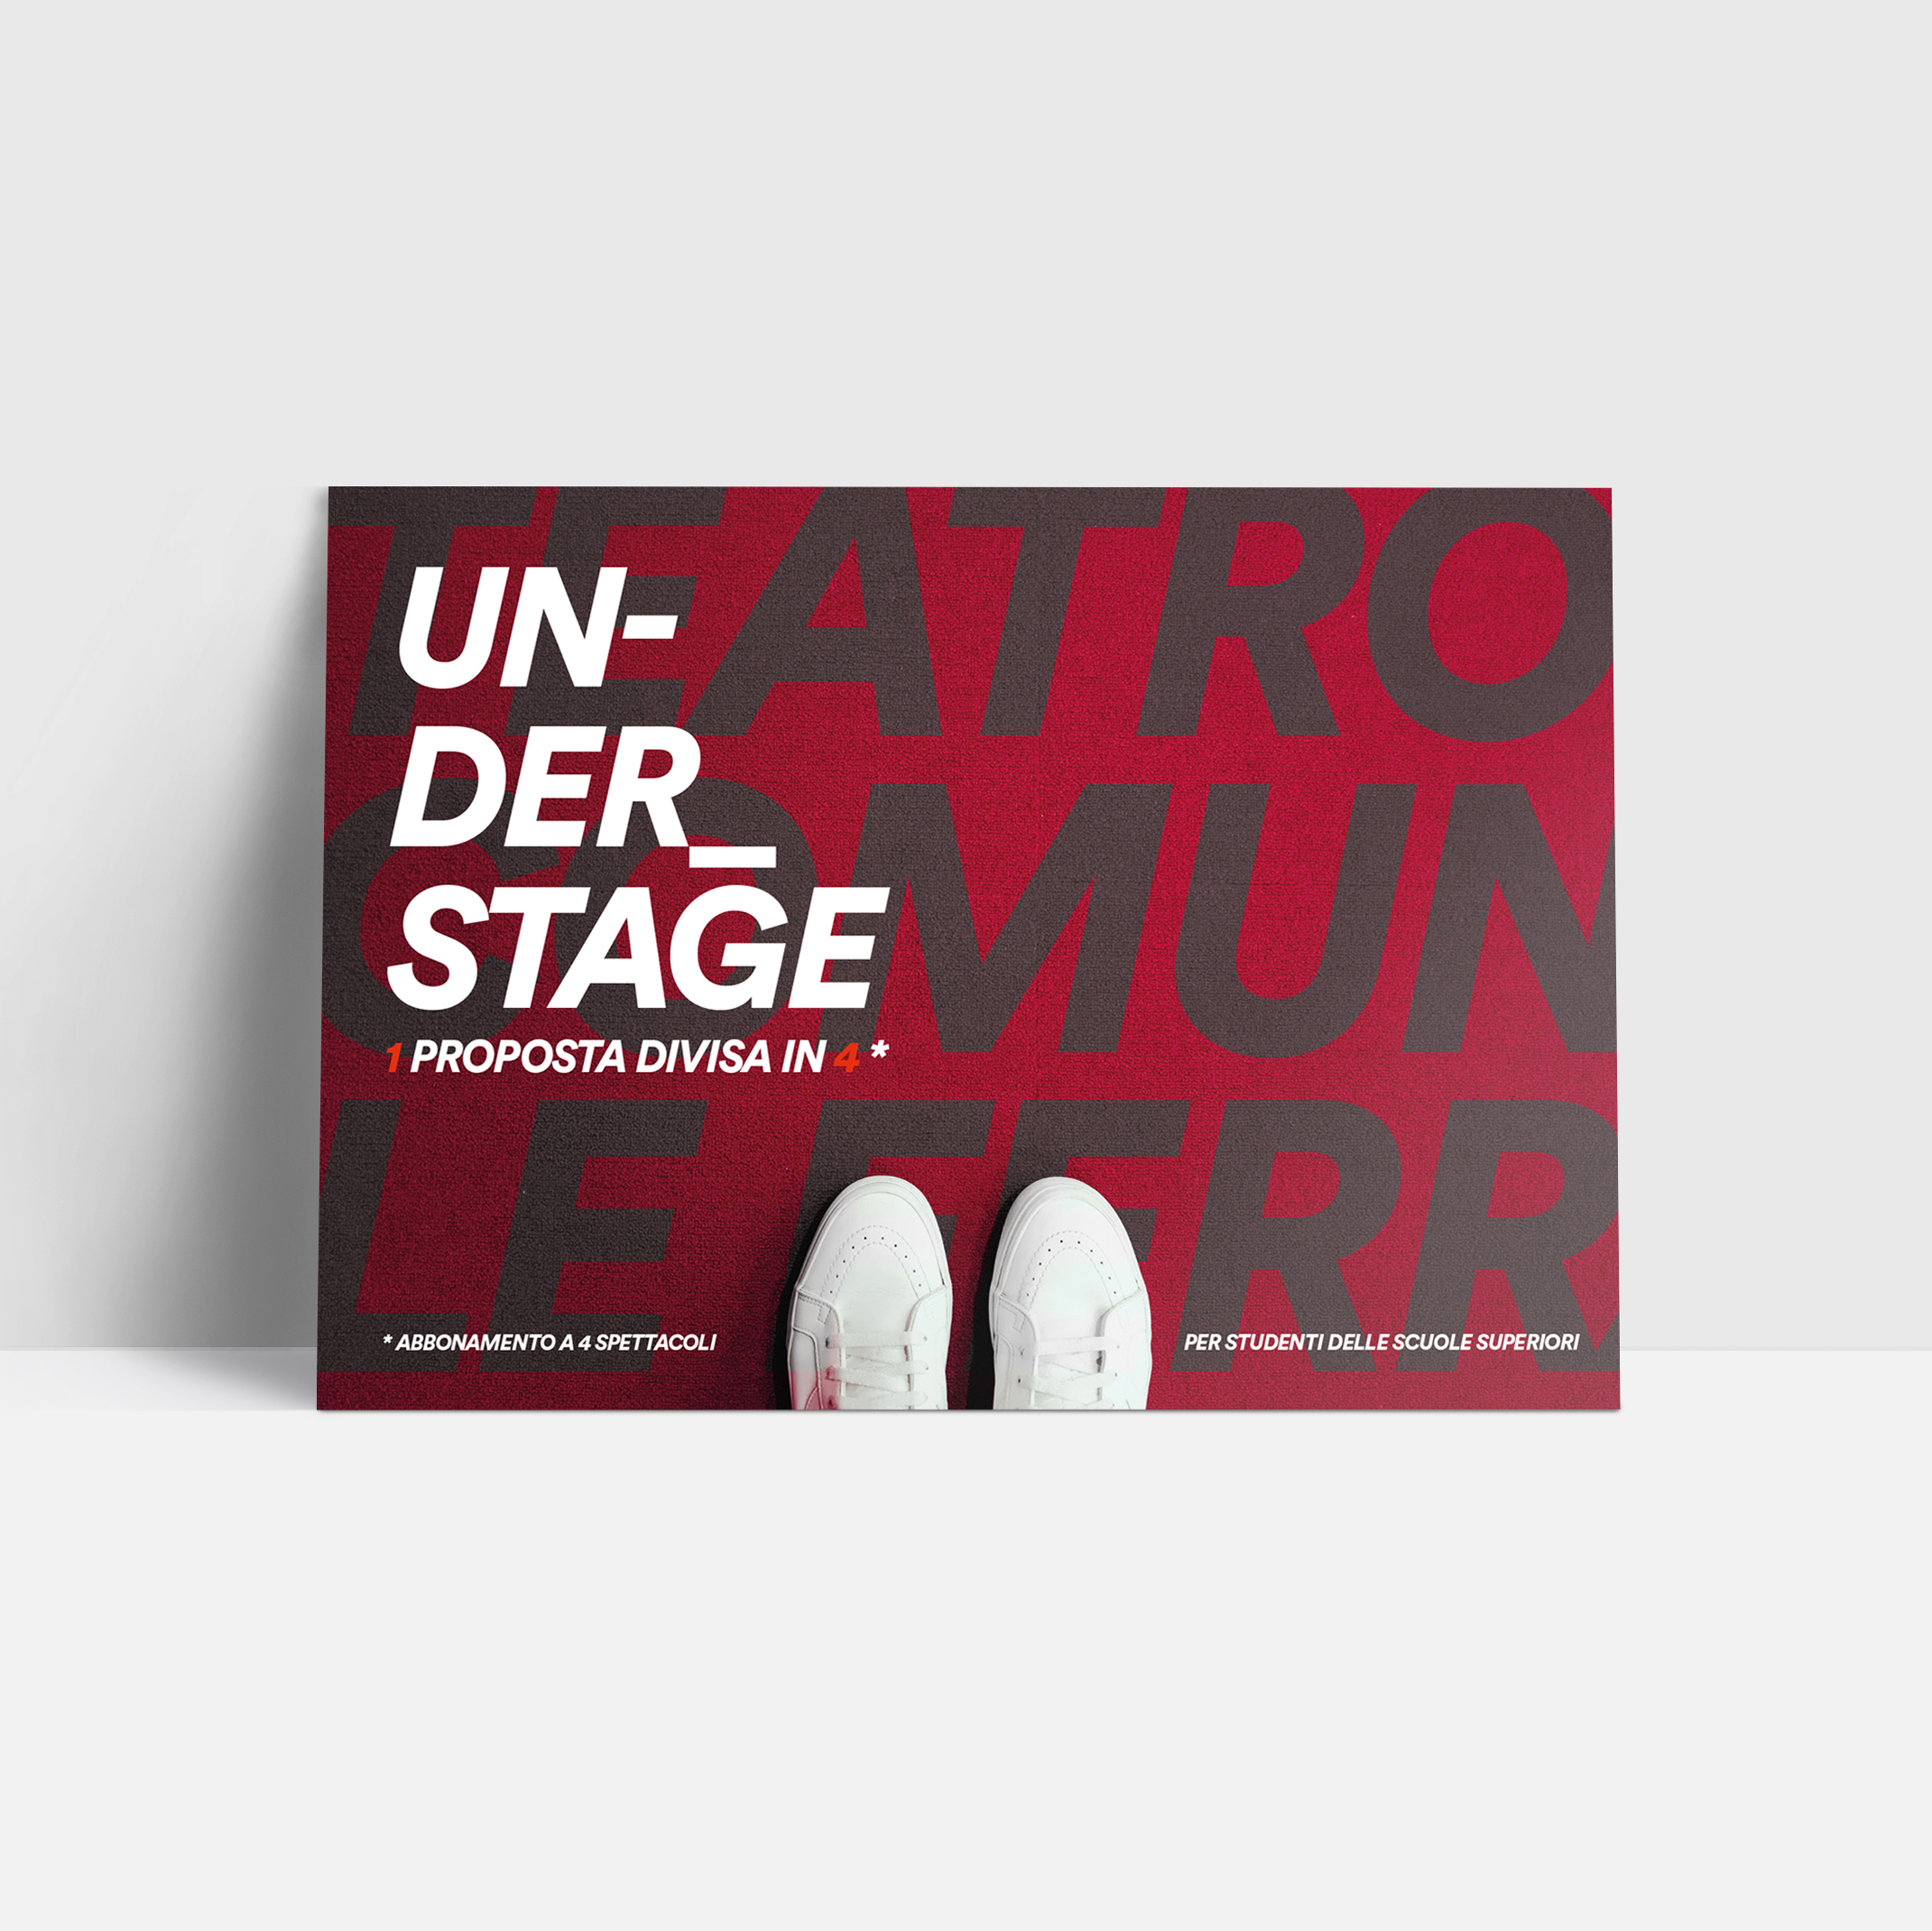 Featured image for “Understage 2019”